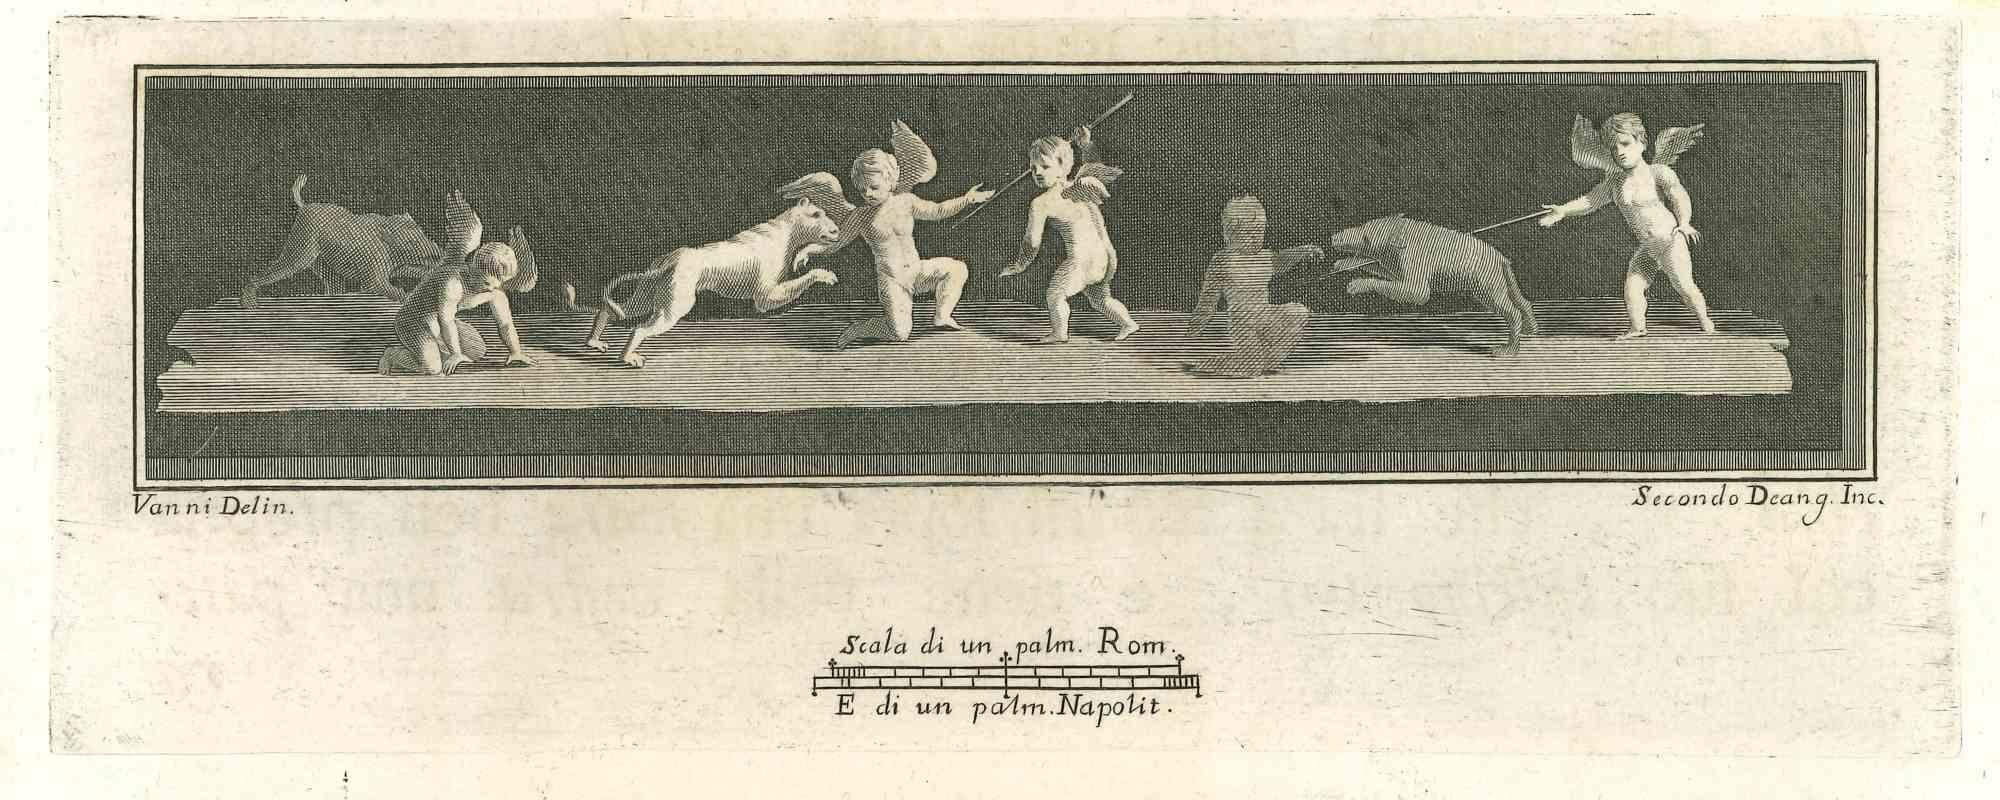 Ancient Roman Statues, from the series "Antiquities of Herculaneum", is an etching on paper realized from a design by Nicolò Vanni in the 18th century.

Signed on the plate.

Good conditions.

The etching belongs to the print suite “Antiquities of